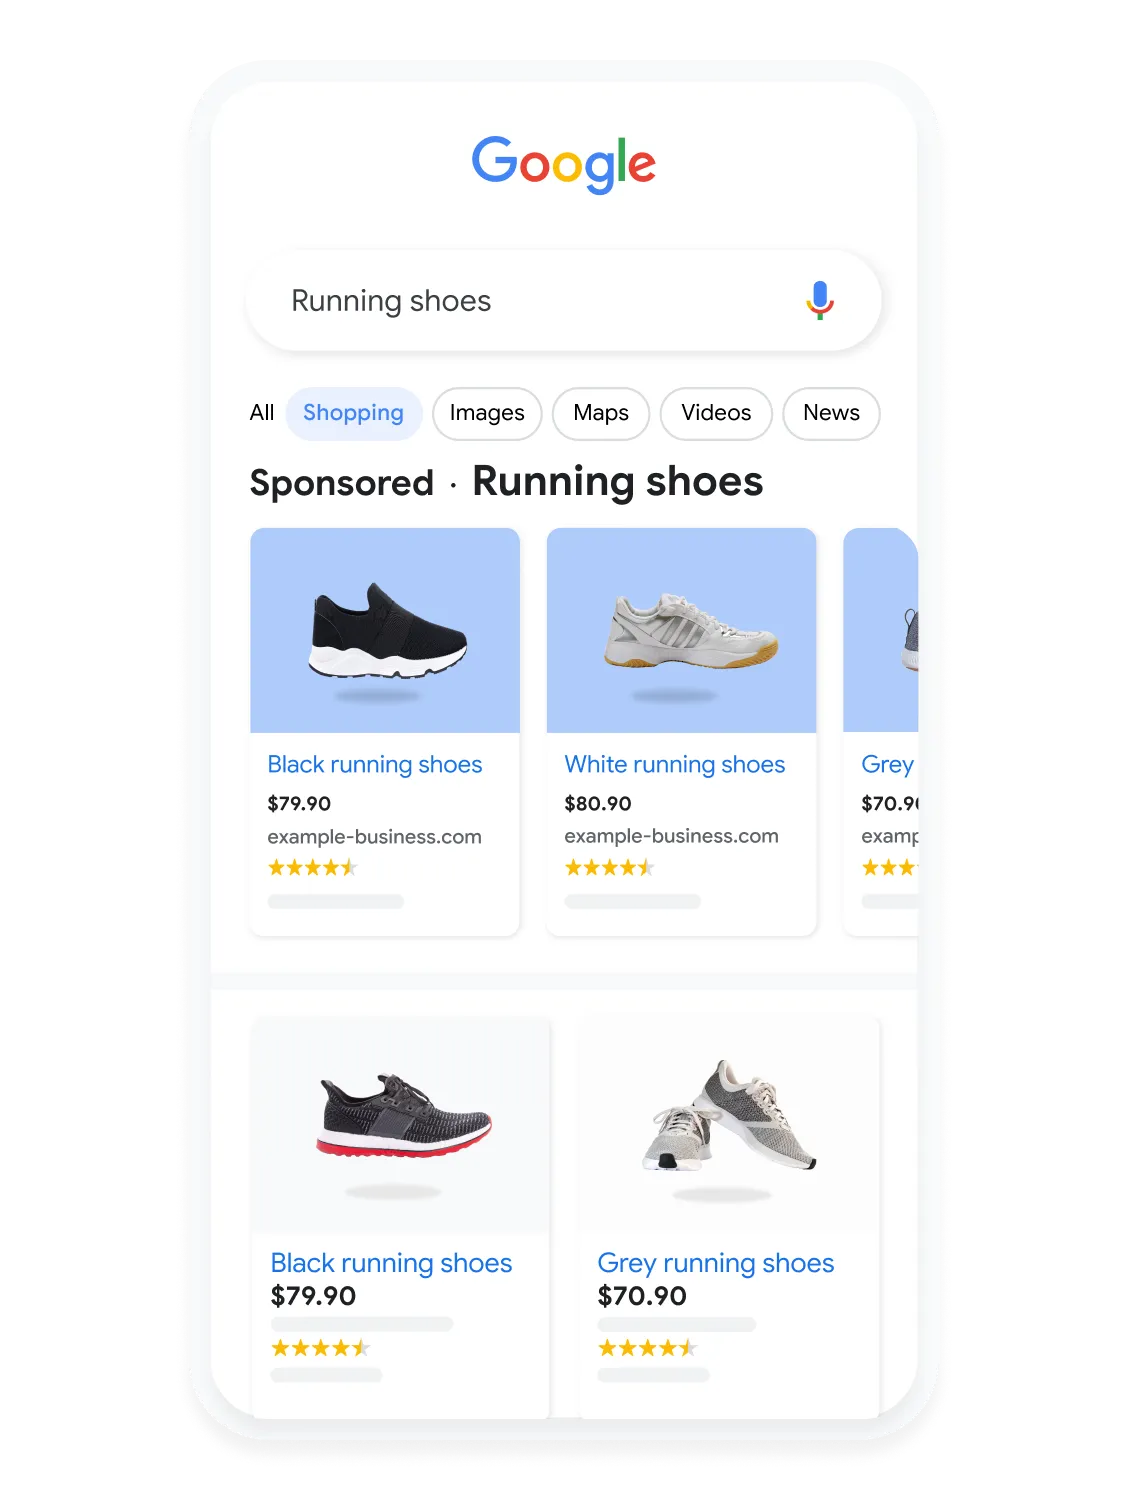 Mobile user interface animated to show a user searching for running shoes on Google Shopping.